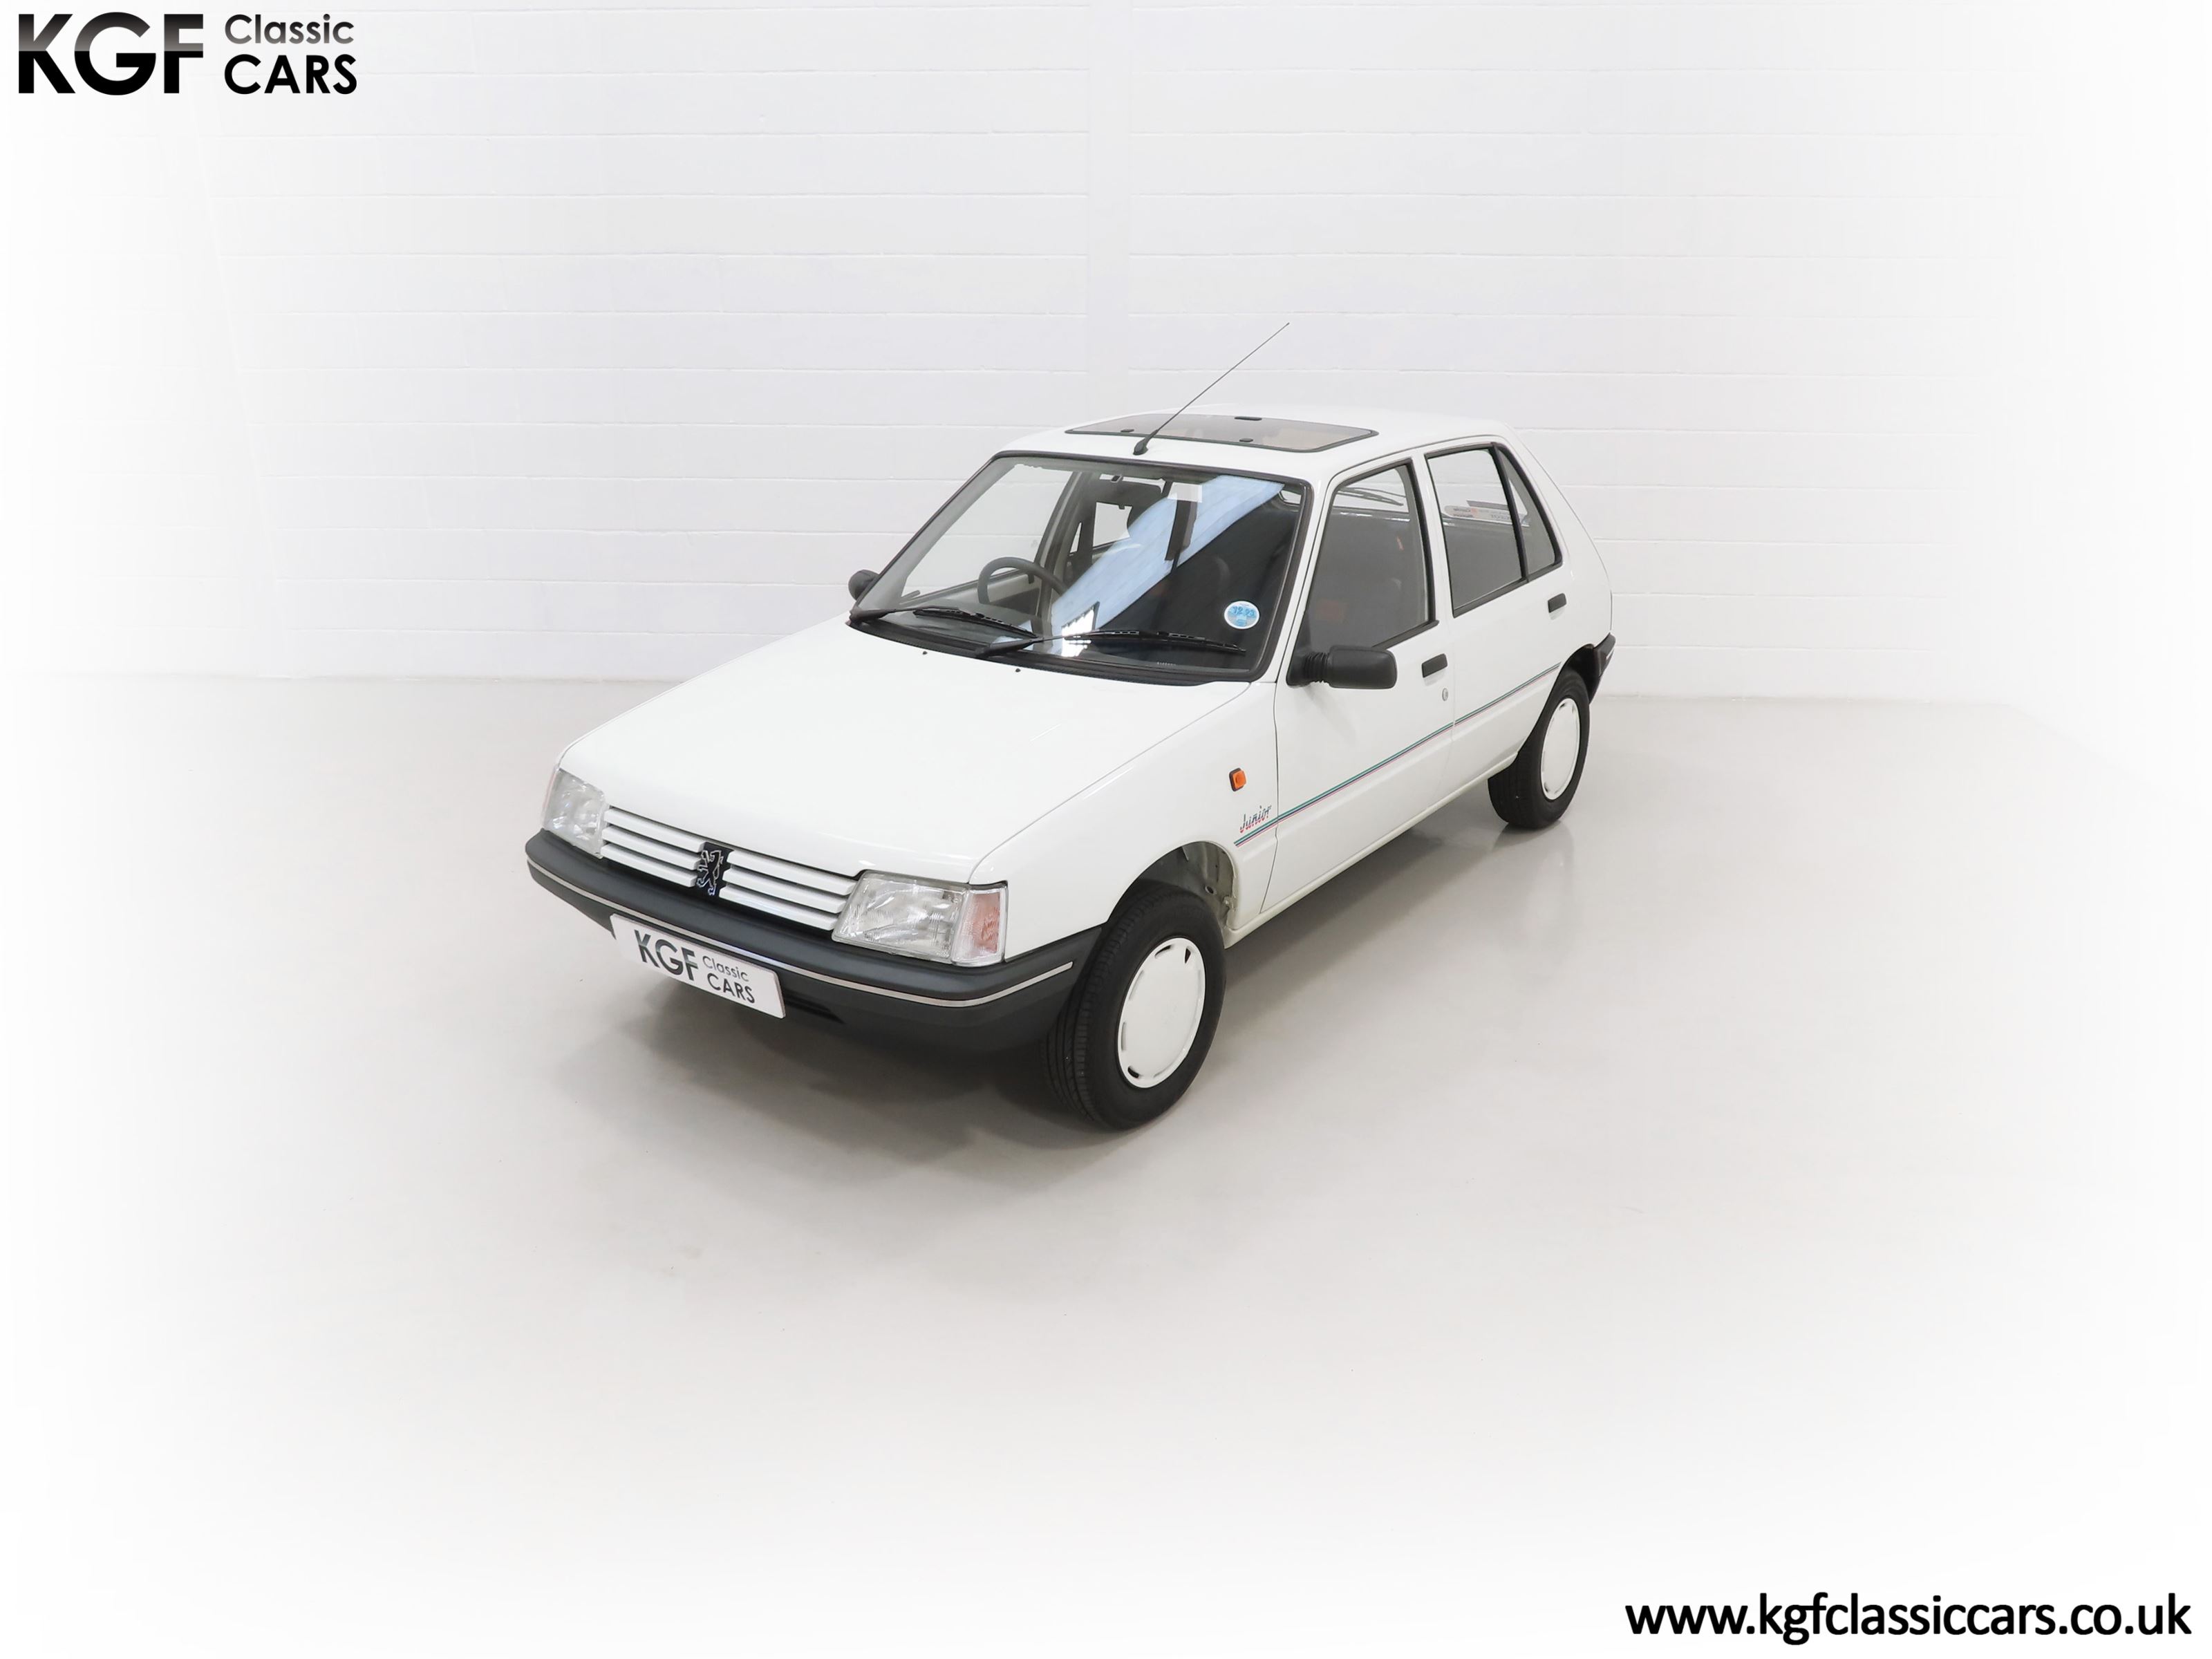 Peugeot 205  ute7pagv8syx70z1awkh